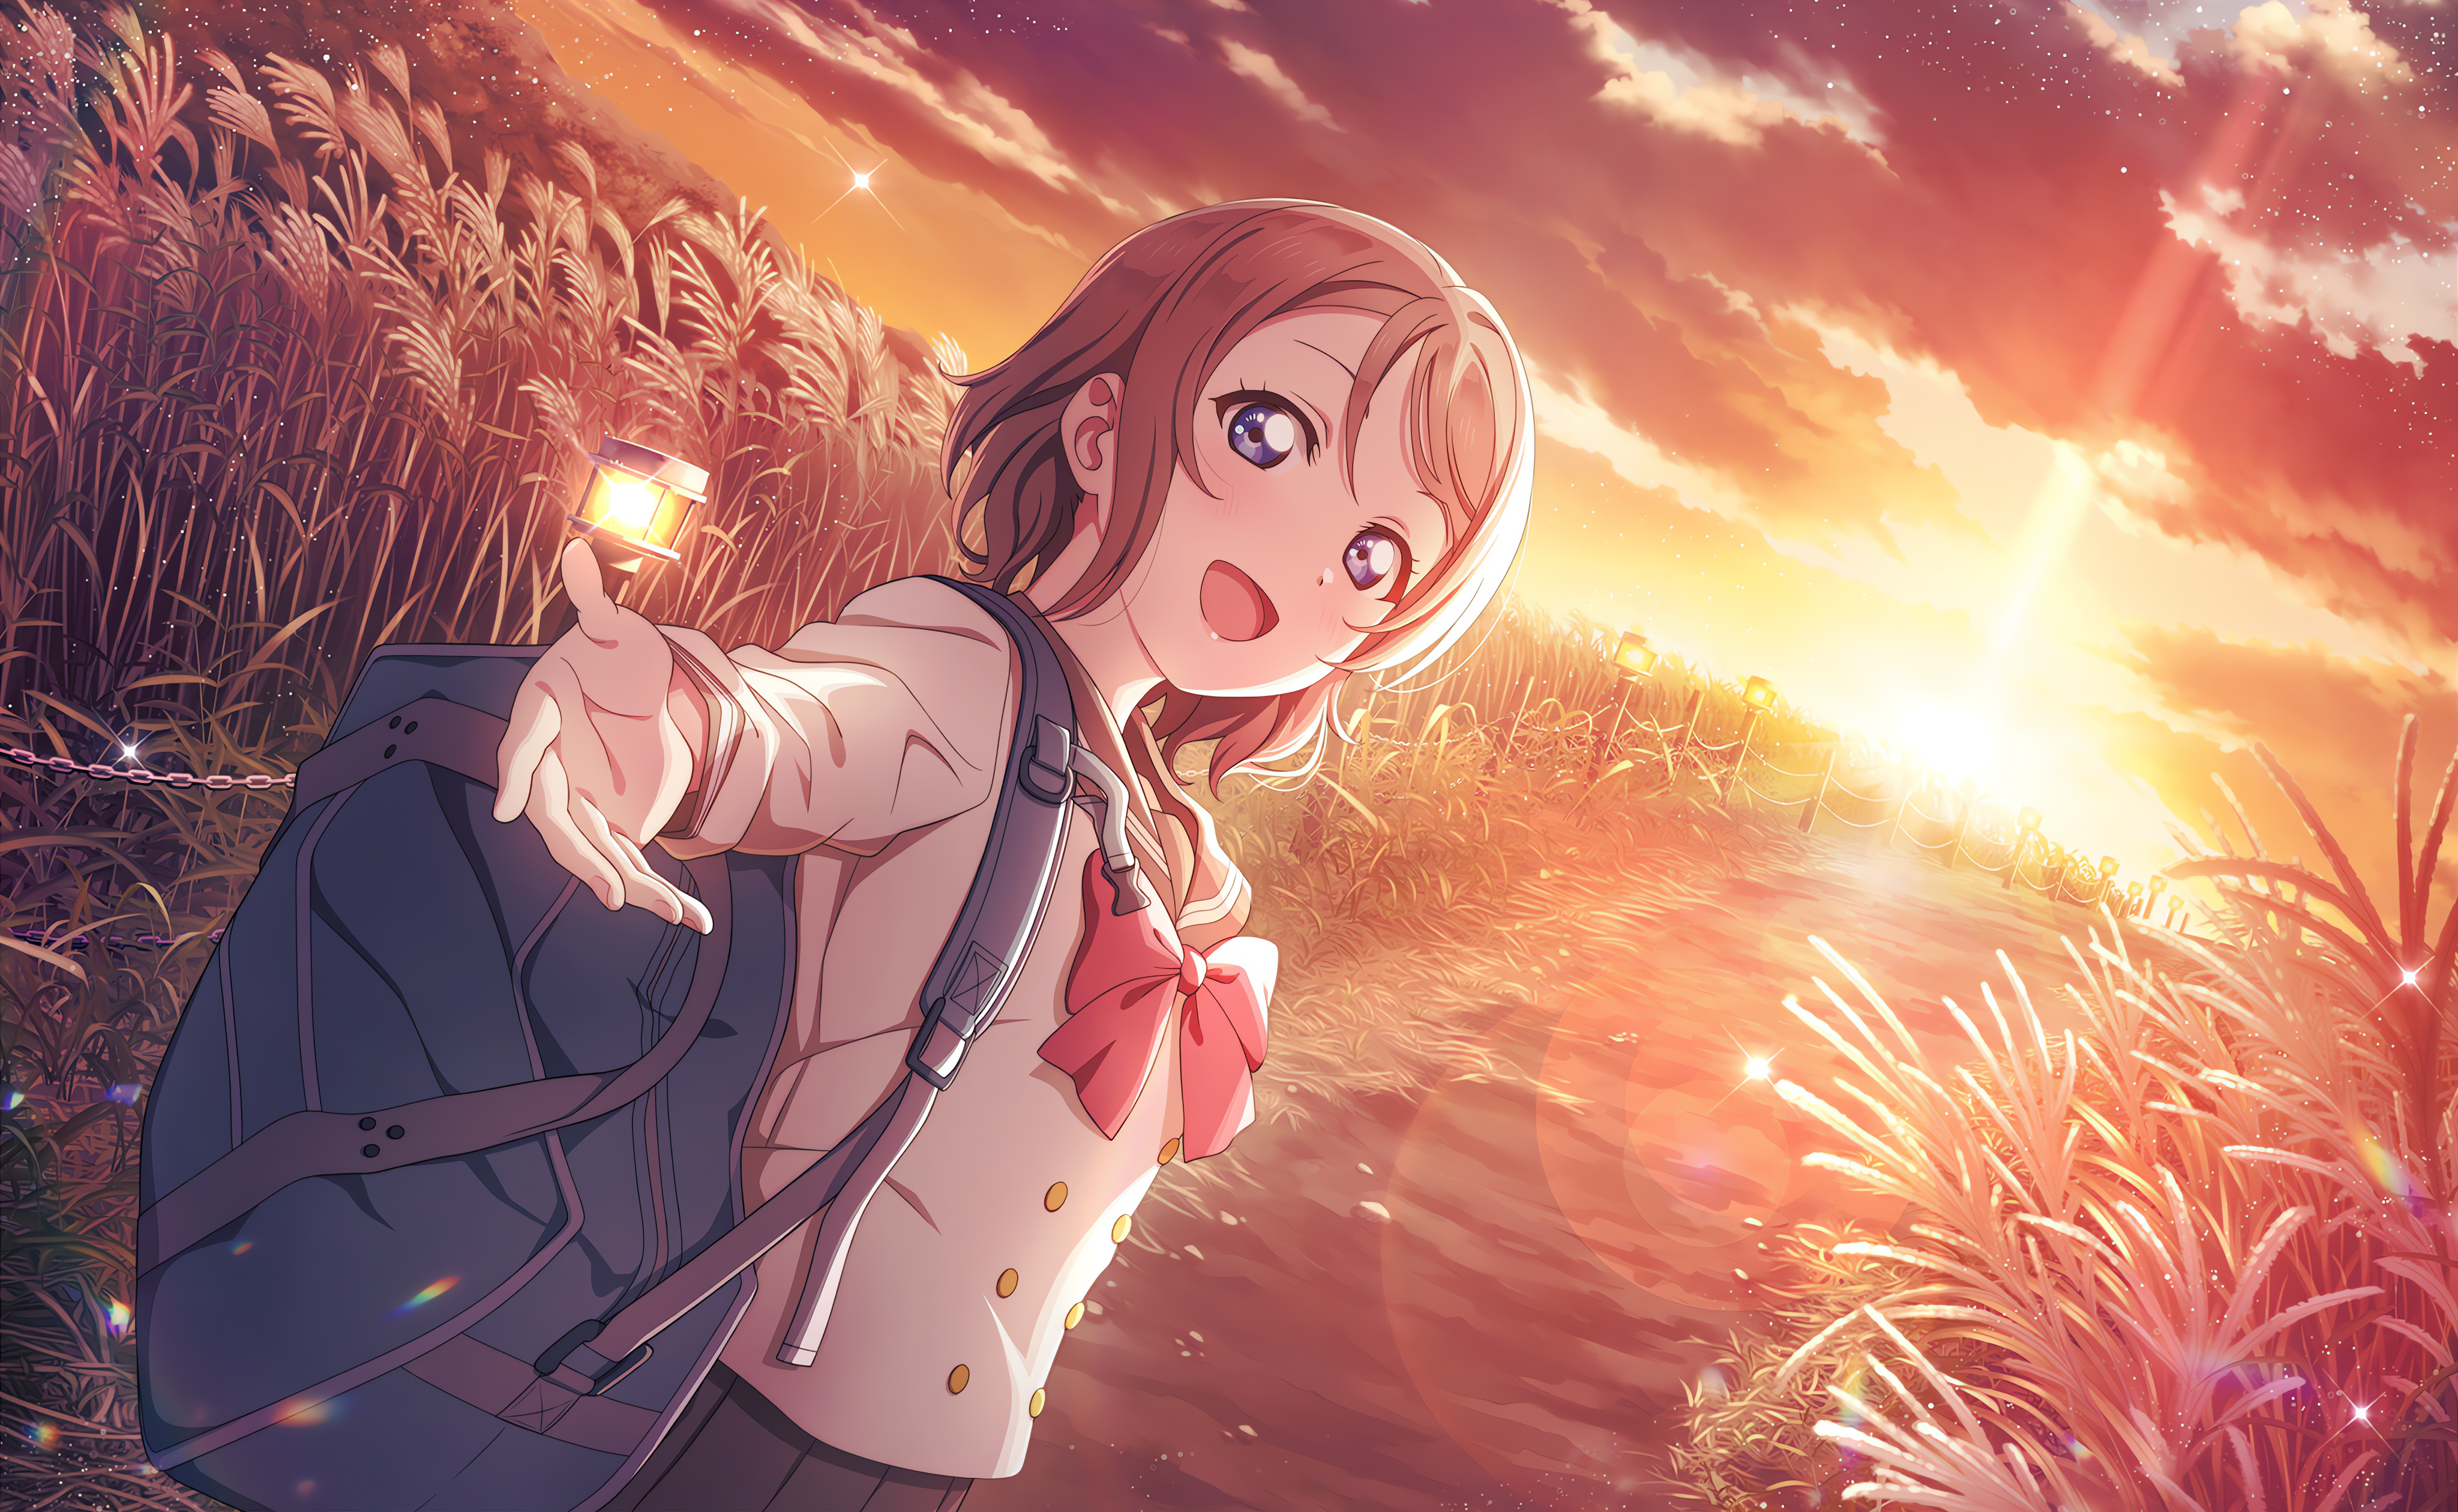 Anime 4096x2520 Watanabe You Love Live! Love Live! Sunshine Sun arms reaching backpacks schoolgirl school uniform field looking at viewer path open mouth anime anime girls sunset sunset glow sky clouds sunlight bow tie